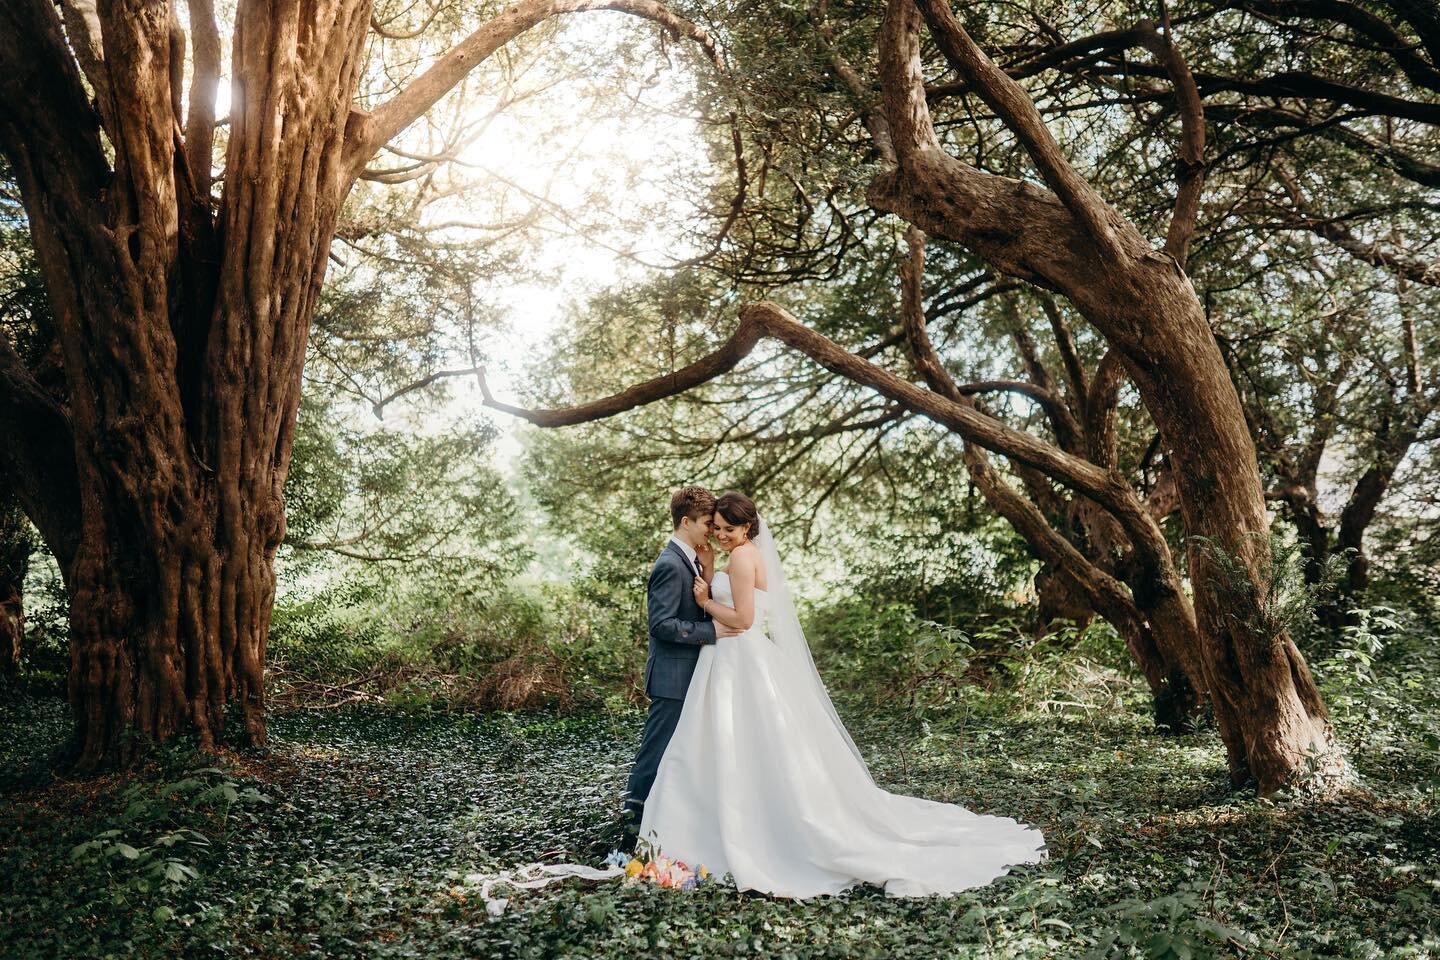 And we&rsquo;re back! Weddings are kicking off again and here&rsquo;s a little something from Sarah &amp; Chris&rsquo;s fab day. ☀️🌿